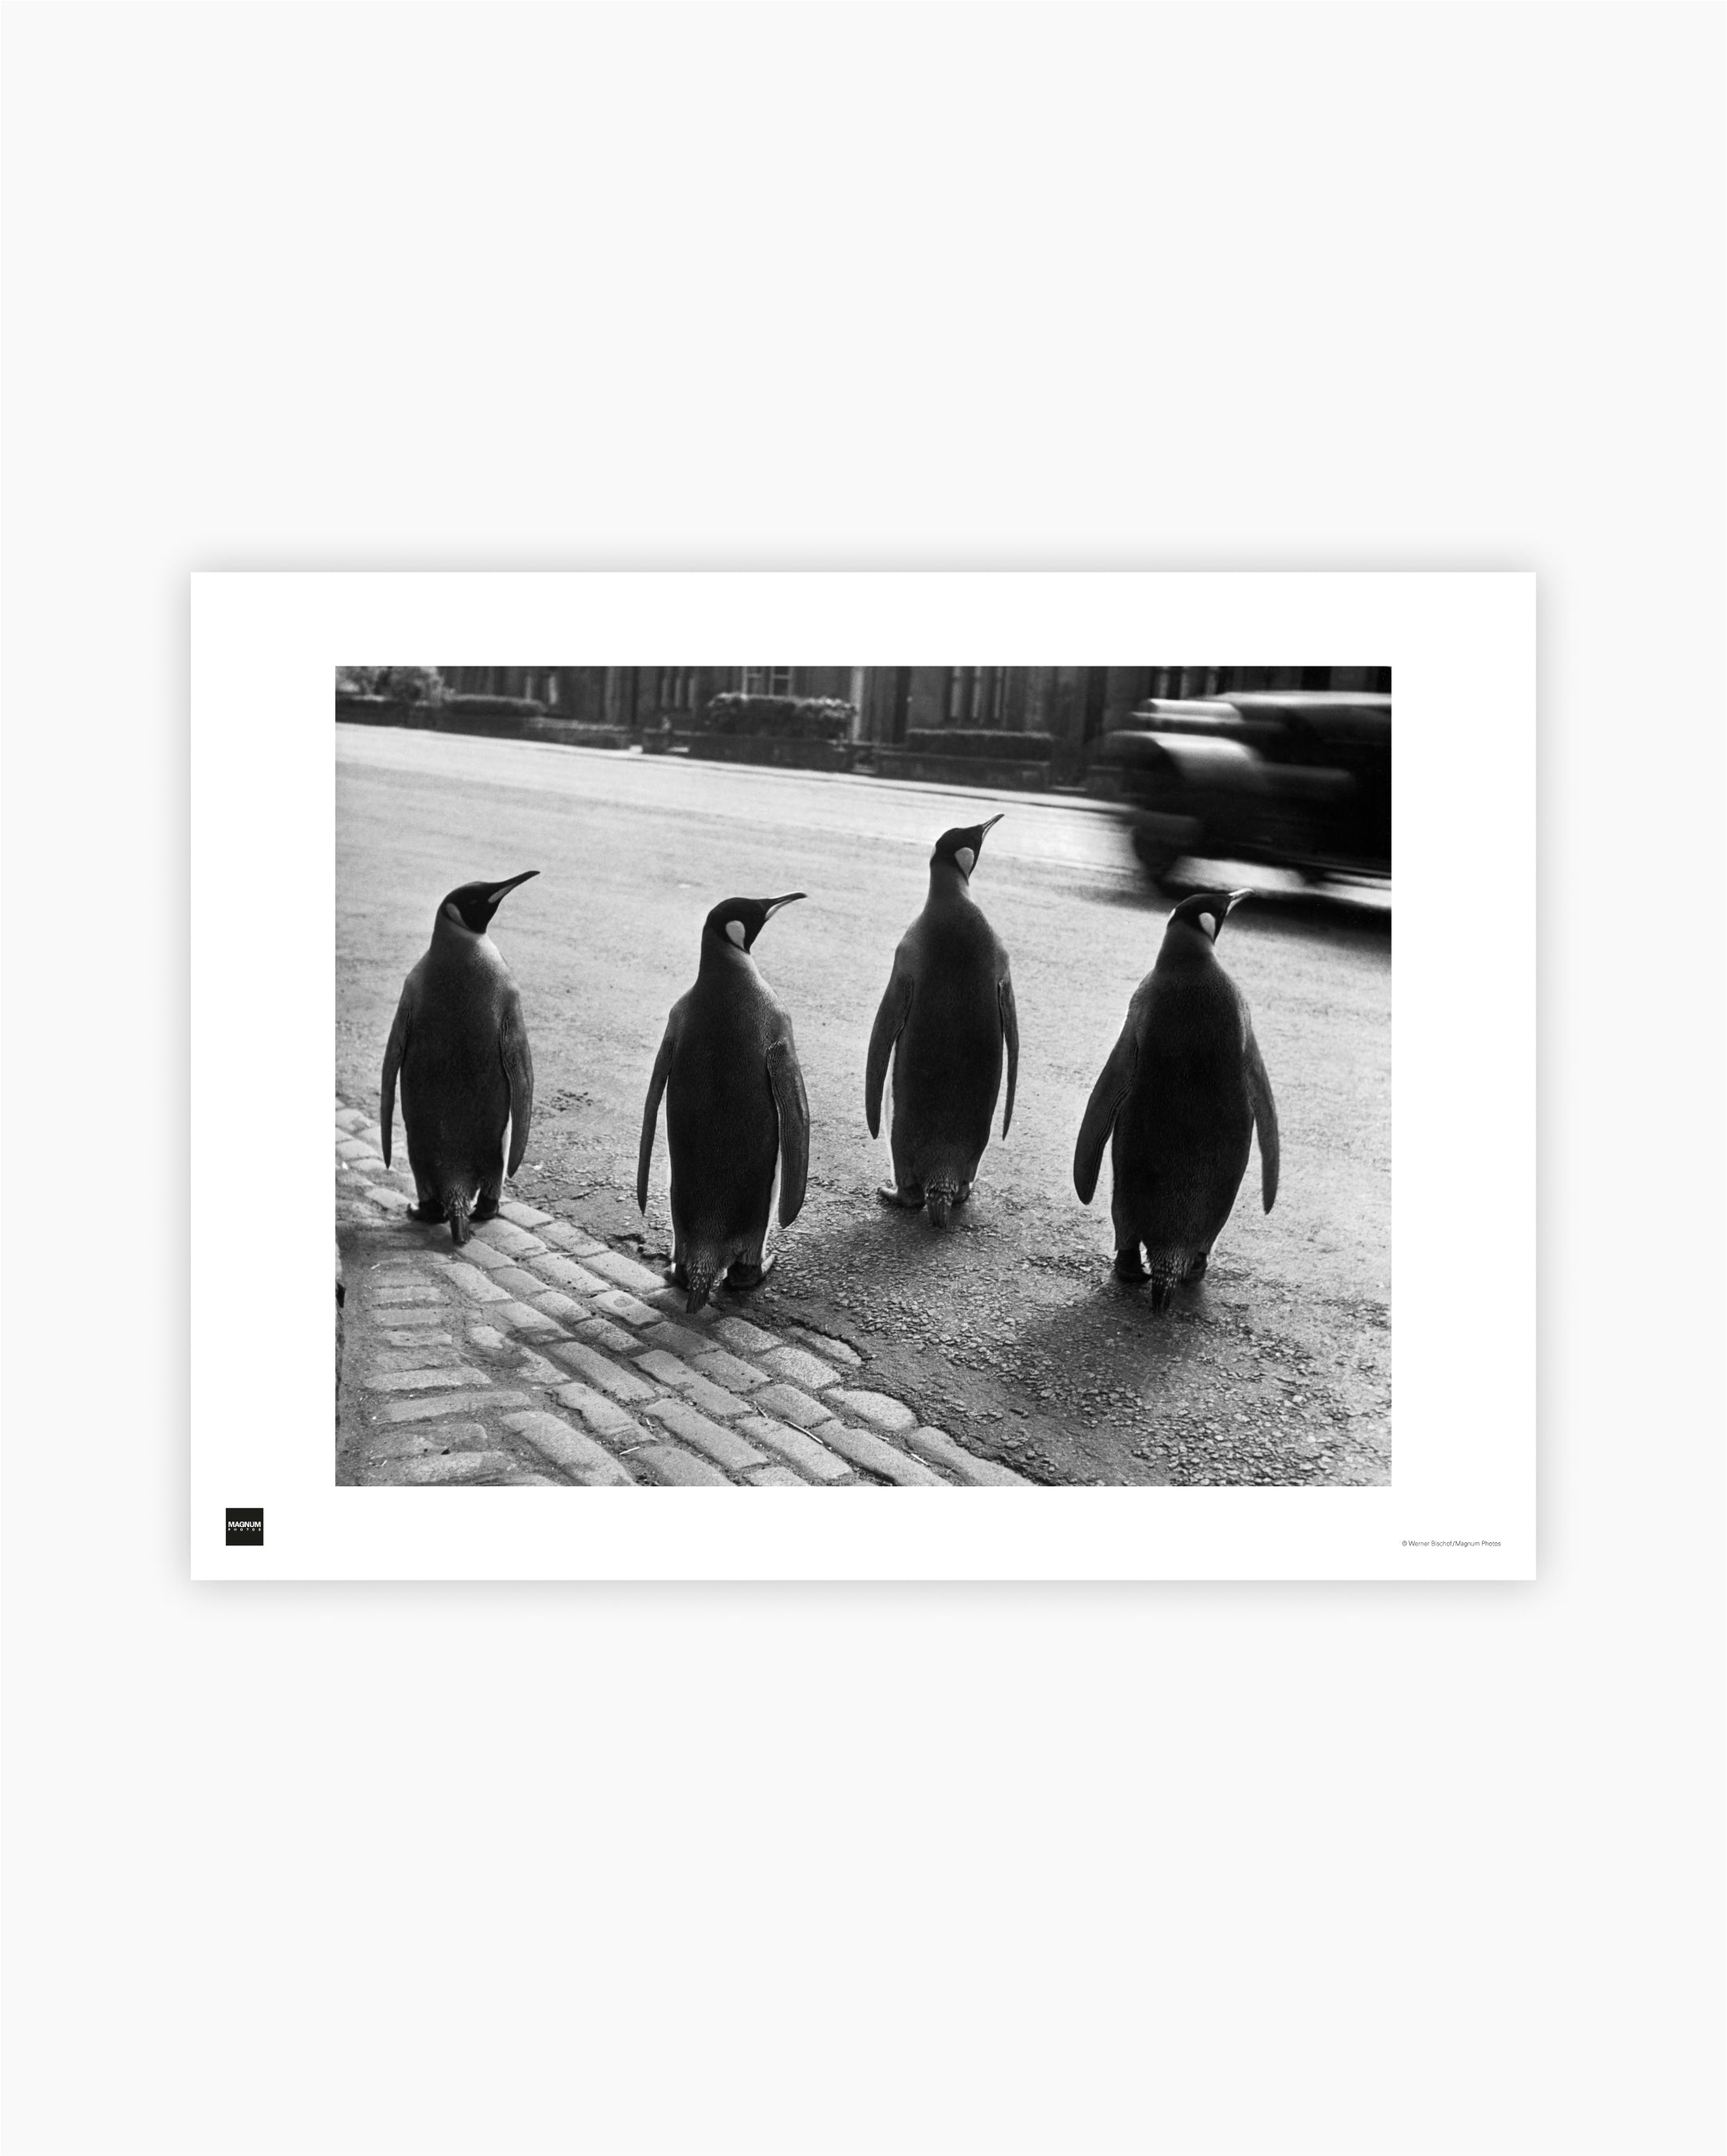 Magnum Poster: Penguins from the zoo taking their weekly walk in Edinburgh, Scotland, 1950